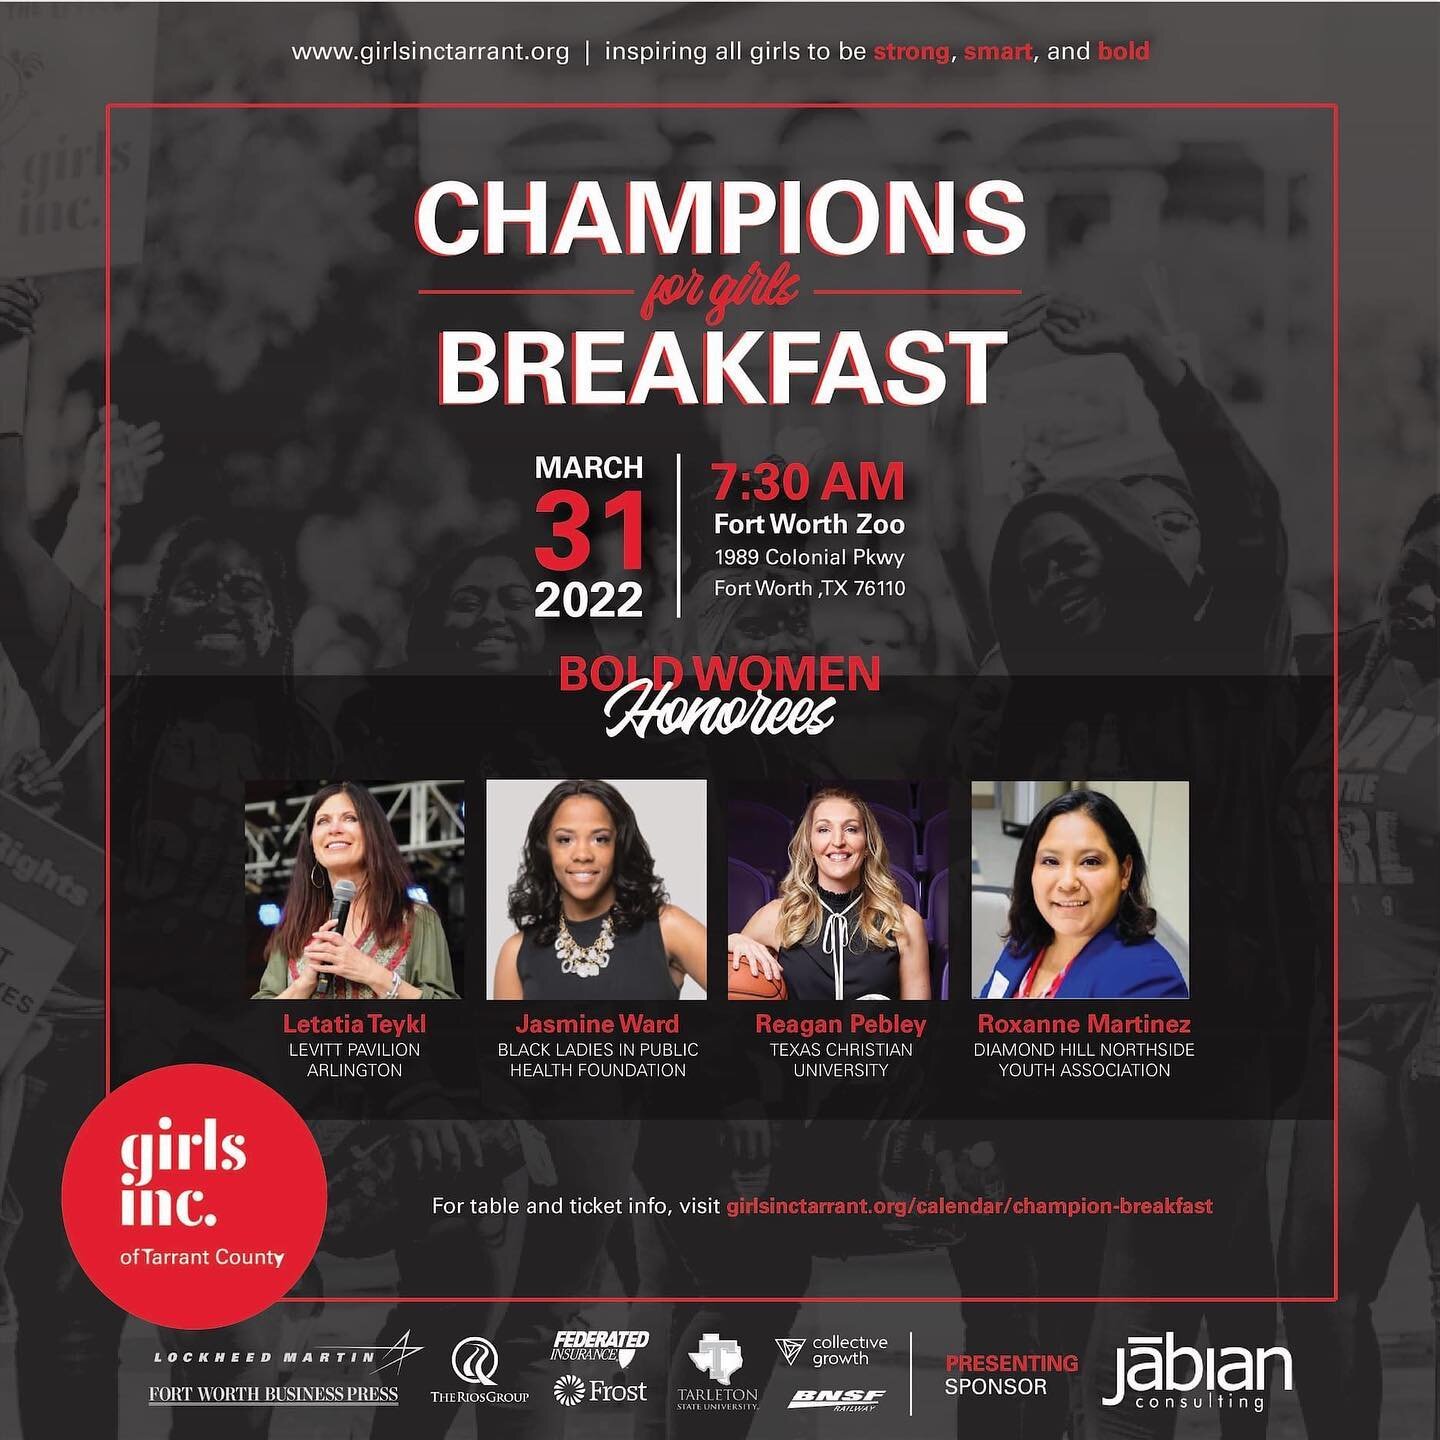 So honored to be back a second year to emcee this special event benefitting @girlsinctarrant. We&rsquo;ll be celebrating the 2022 BOLD WOMEN: Letatia Teykl, Jasmine Ward, Coach Reagan Pebley and Roxanne Martinez! 🥳 Hope you can join us on March 31st